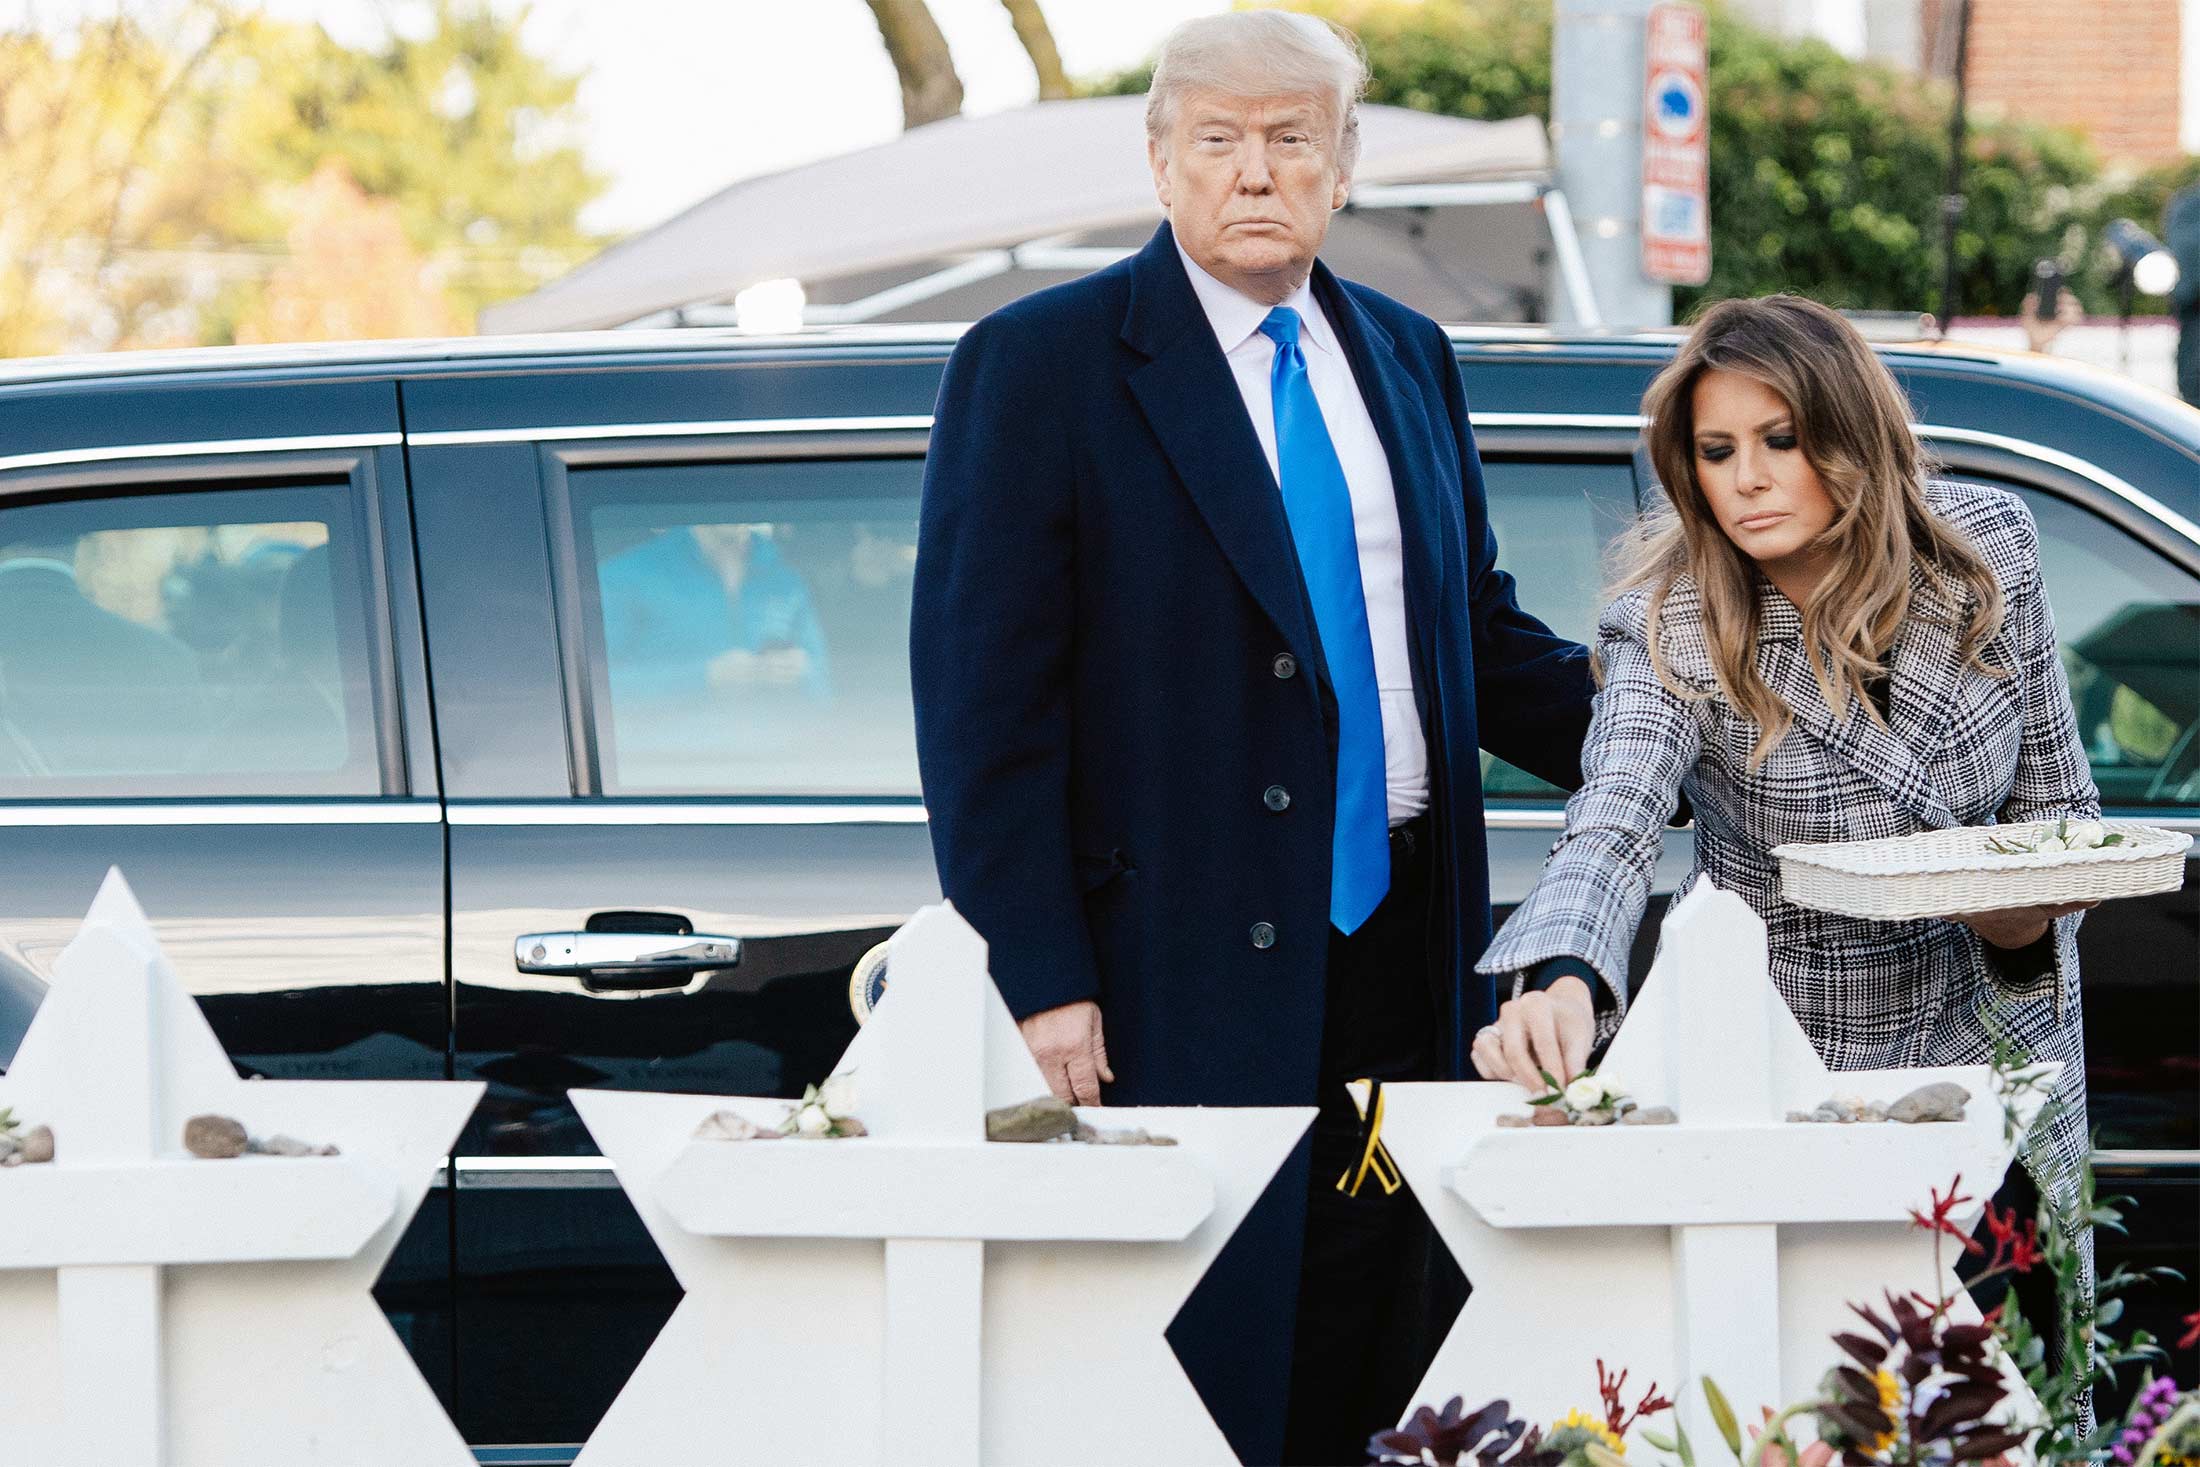 Donald Trump and Melania Trump place stones and flowers on a memorial.